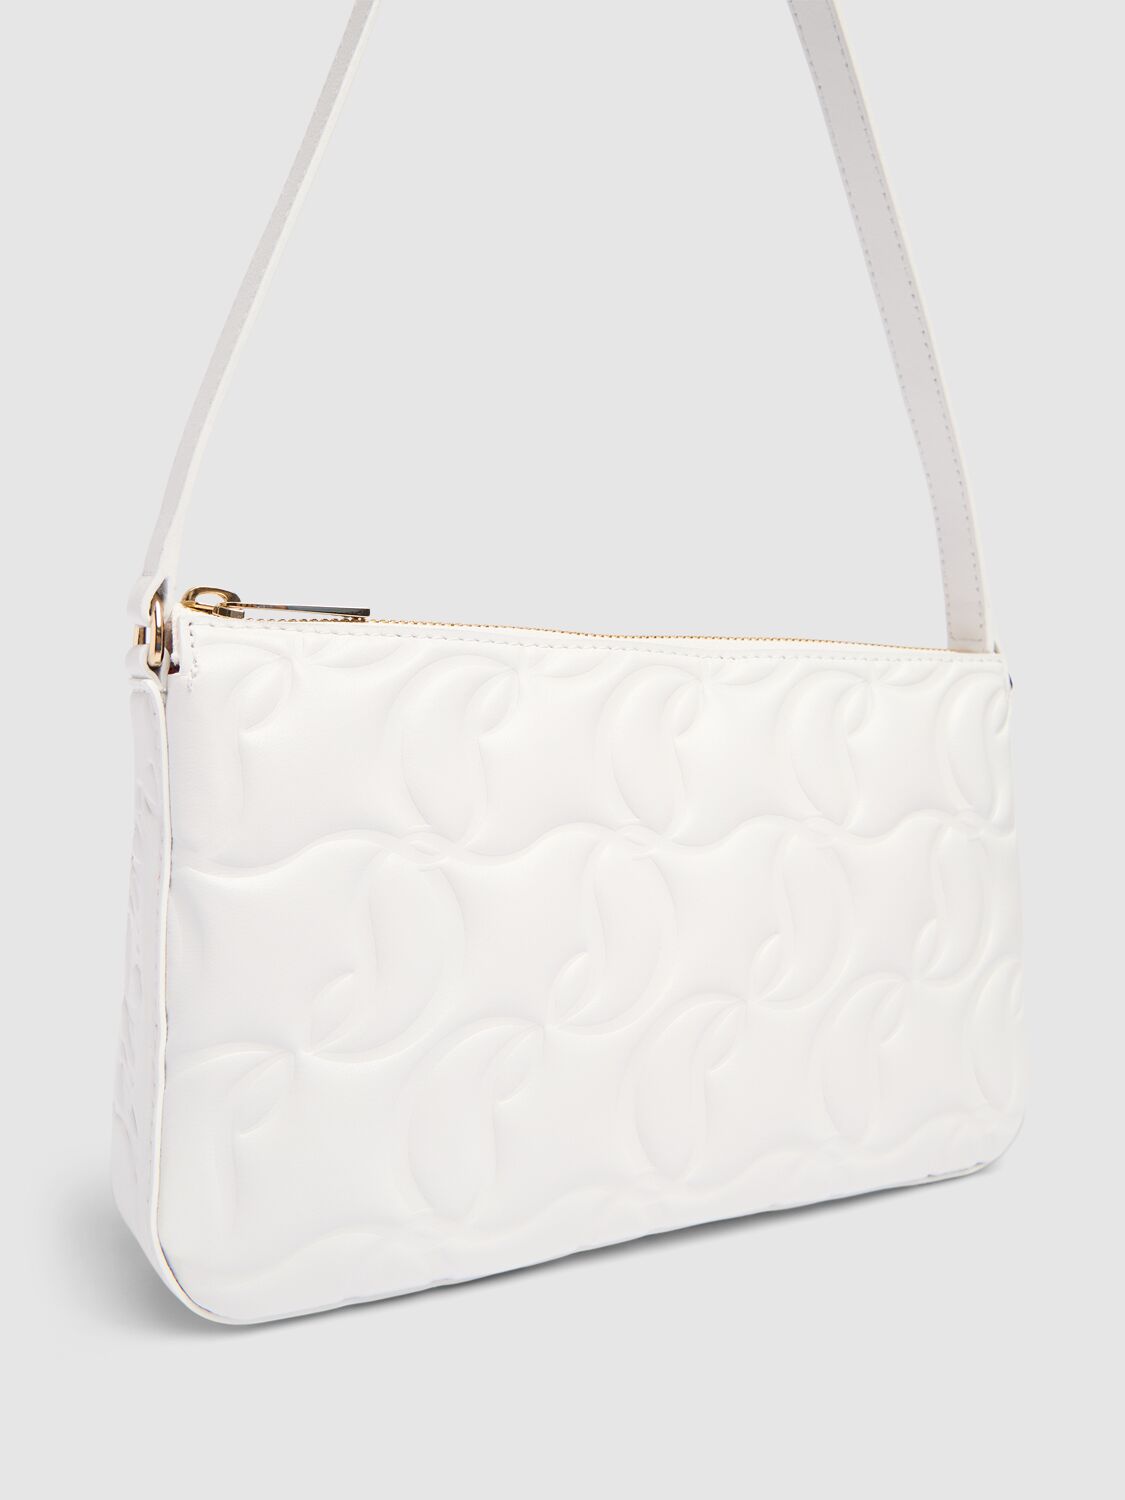 Shop Christian Louboutin Loubile Cl Embossed Leather Shoulder Bag In White